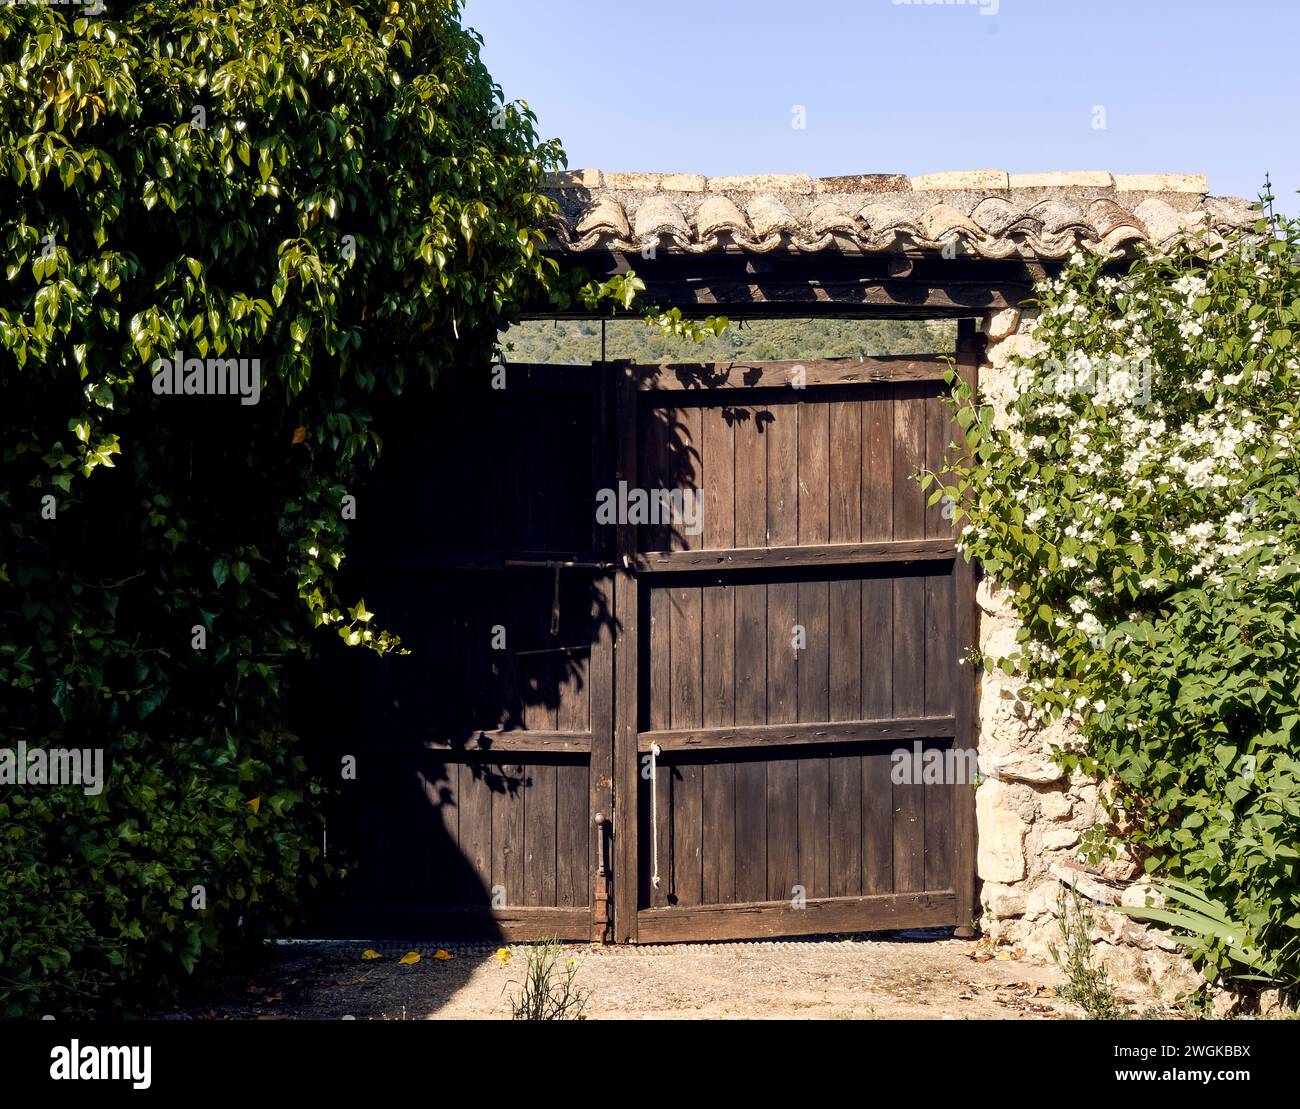 Ivy (Hedera), lilies (Iris) and celinda (Philadelphus coronarius) frame a wooden gate with a roof in the patio of a town house. Stock Photo